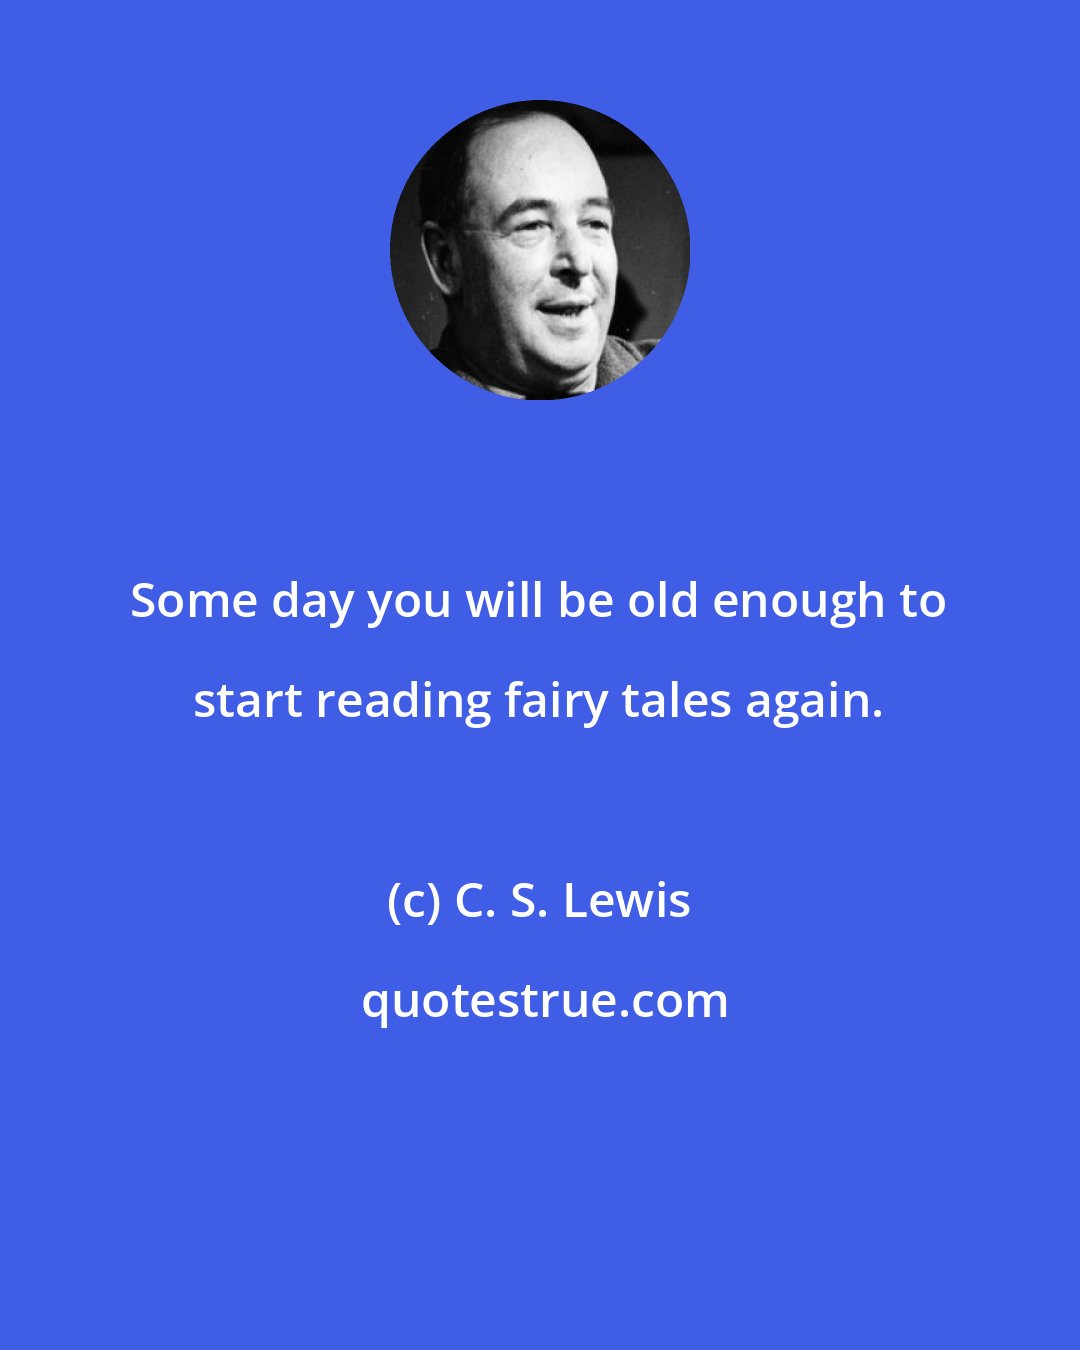 C. S. Lewis: Some day you will be old enough to start reading fairy tales again.